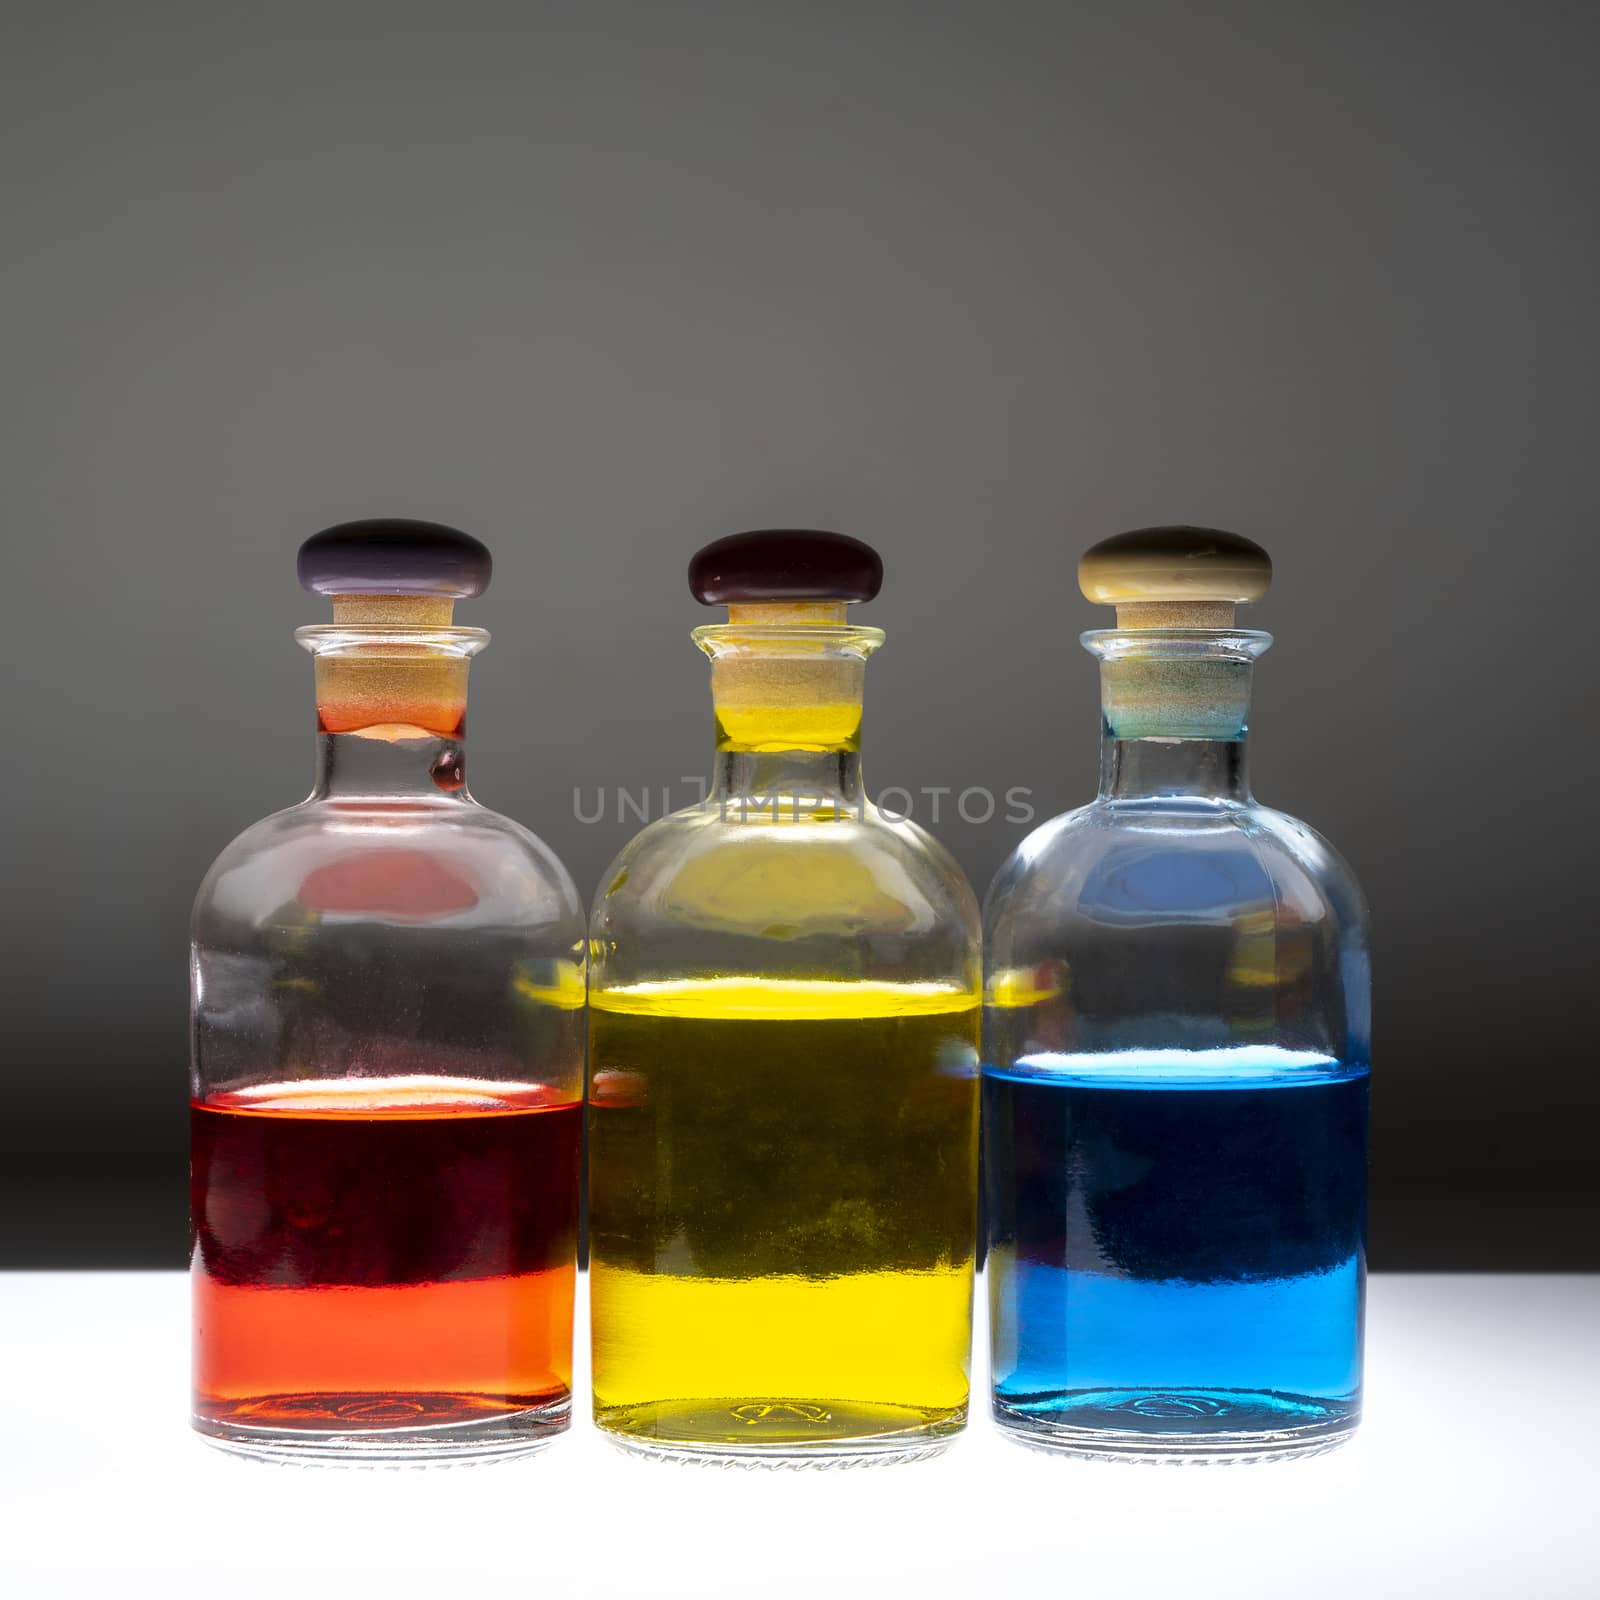 Bottles with colored liquid by sergiodv